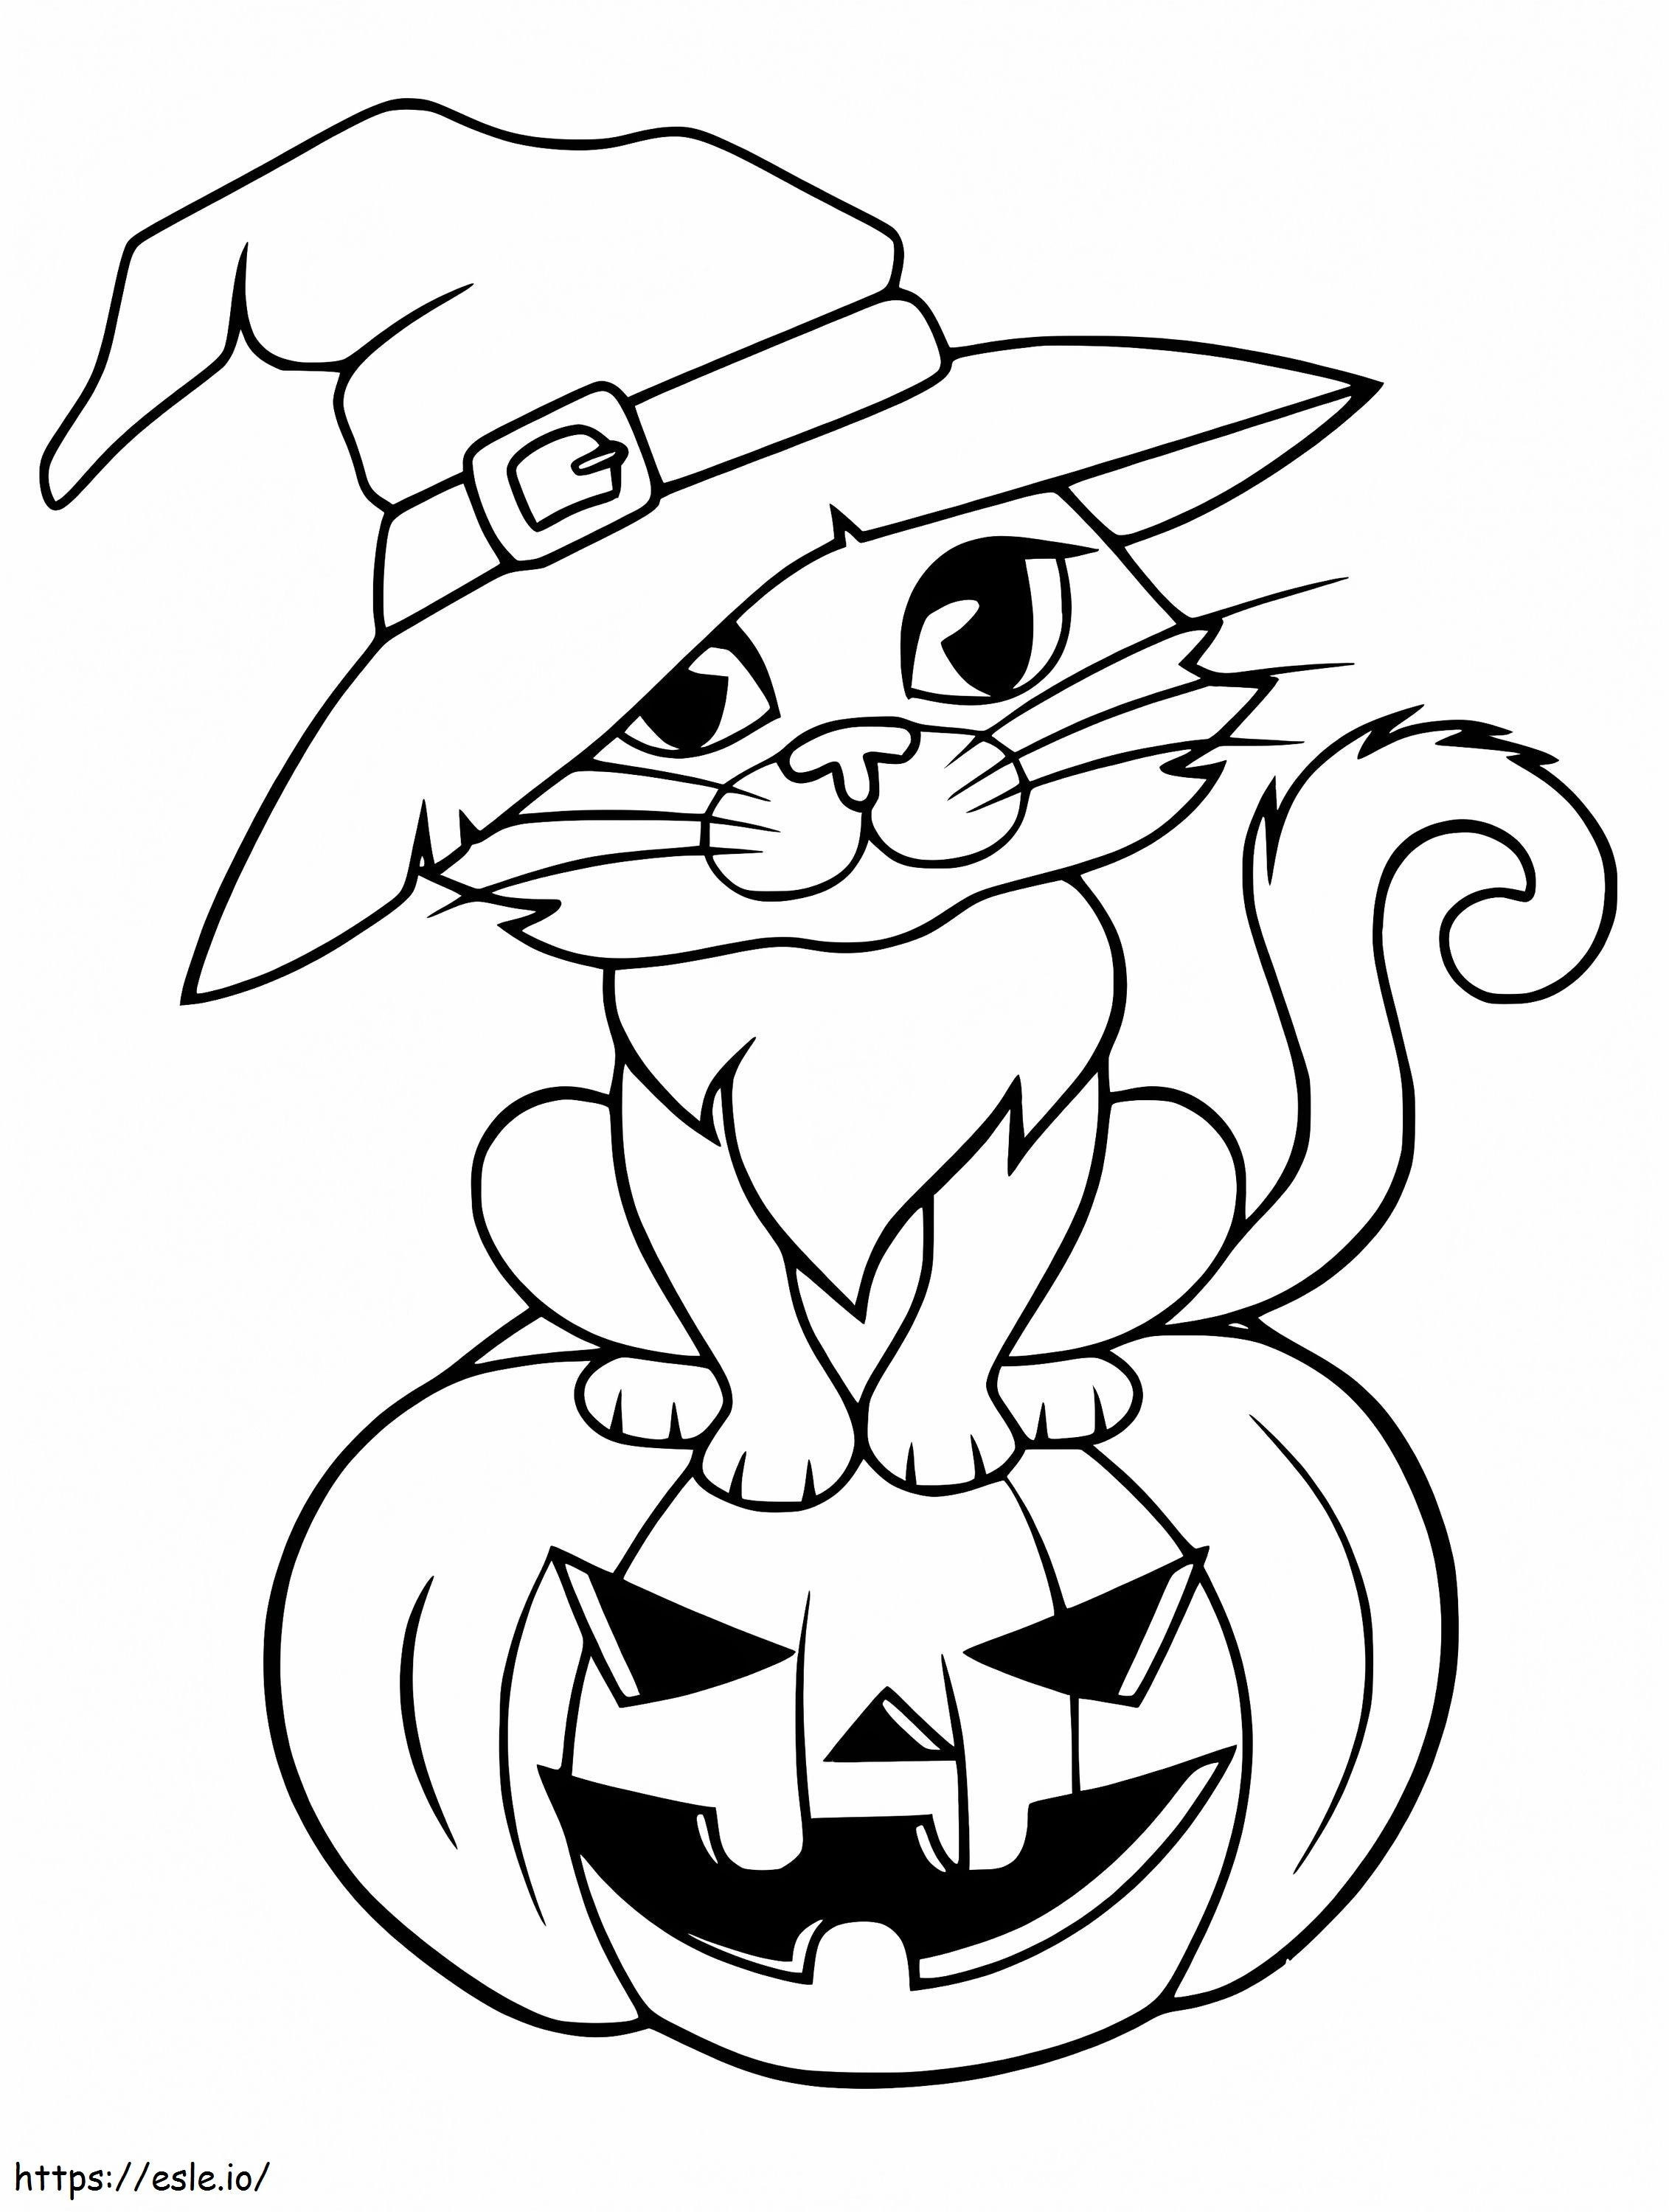 Halween Cat 1 coloring page